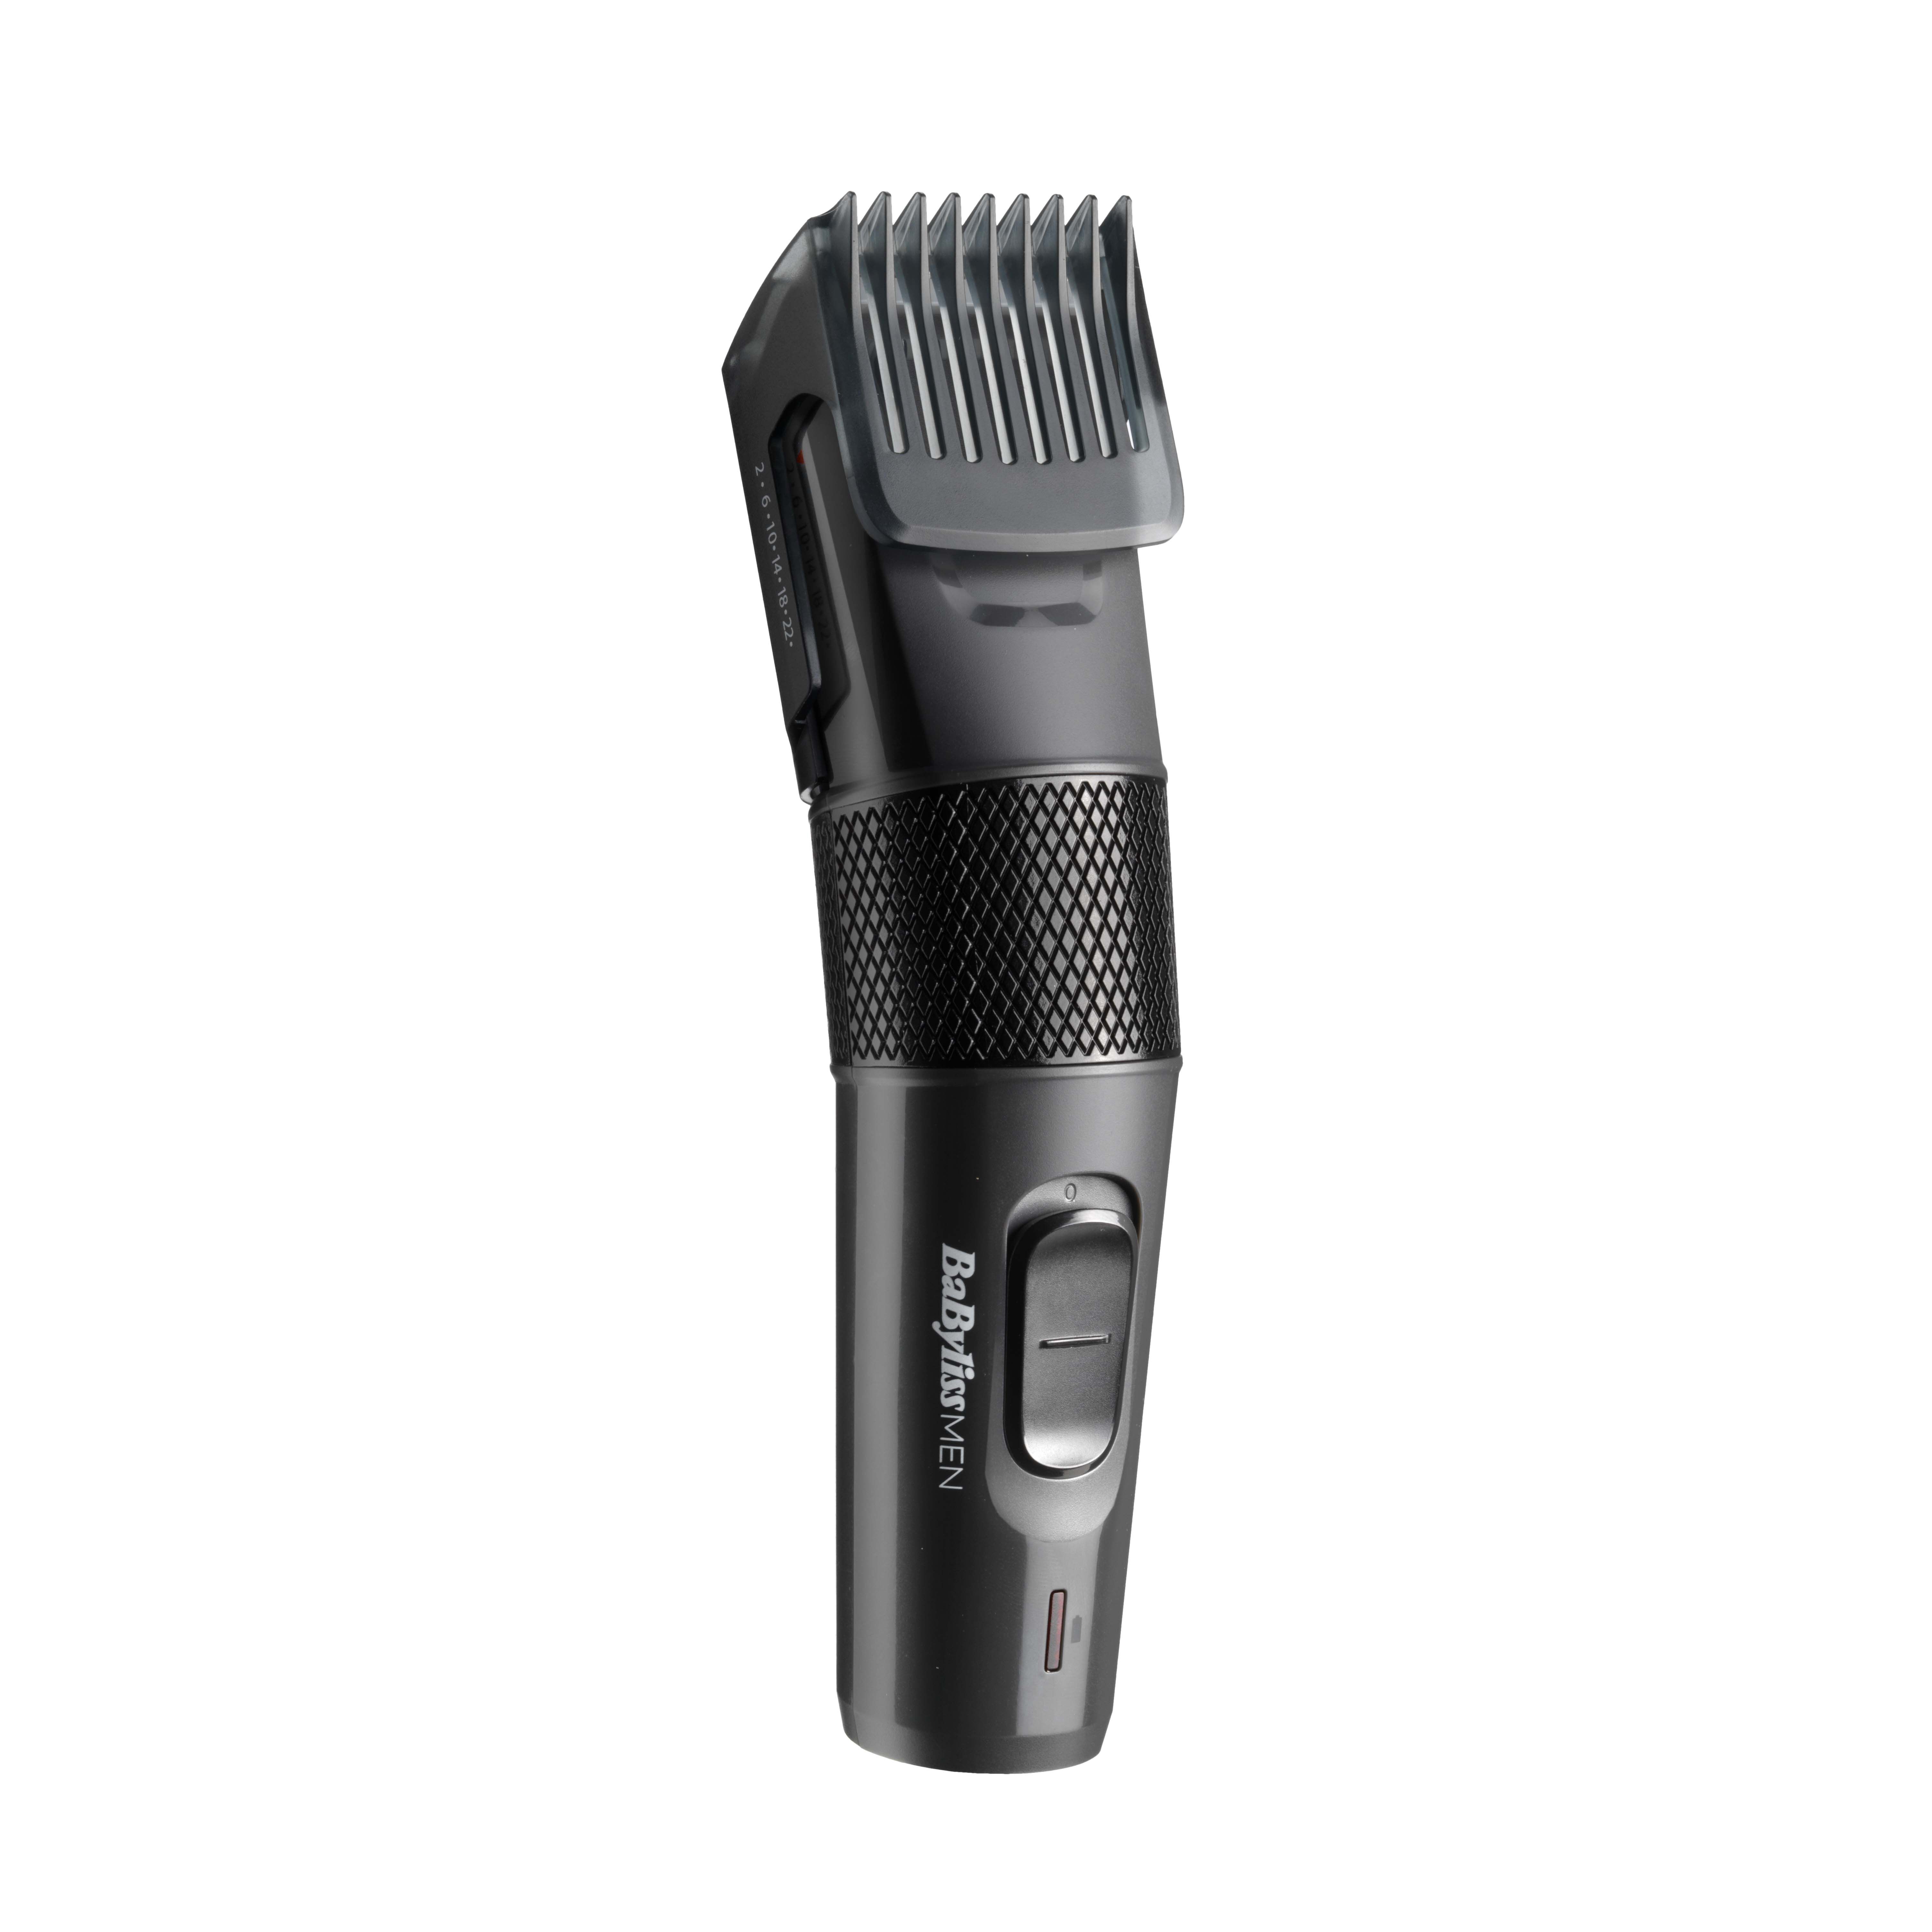 hair clippers that cut the closest